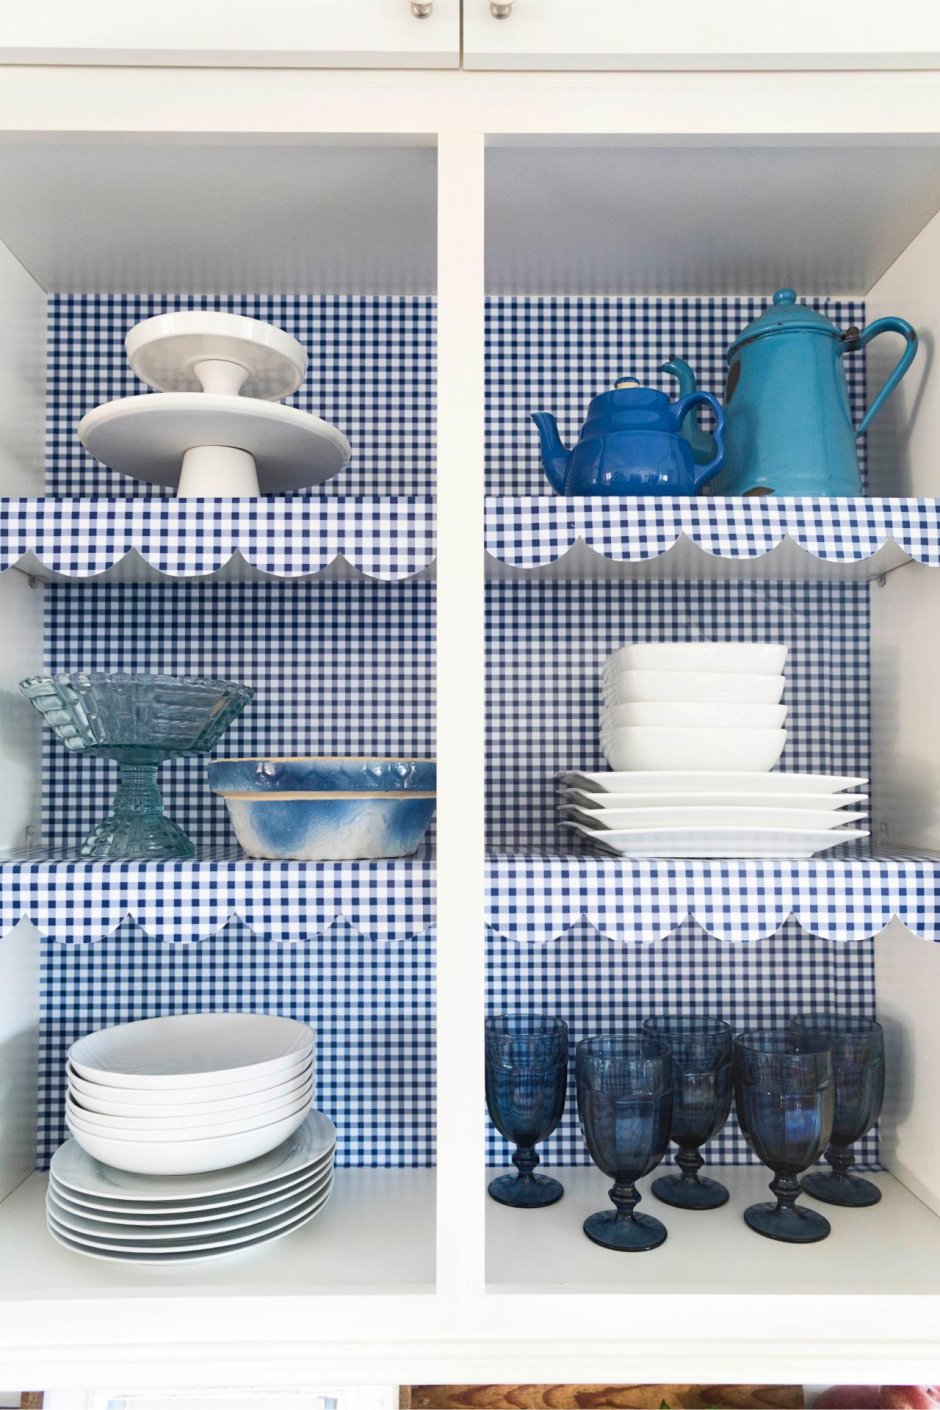 Shelf drawer liners for kitchen cabinets